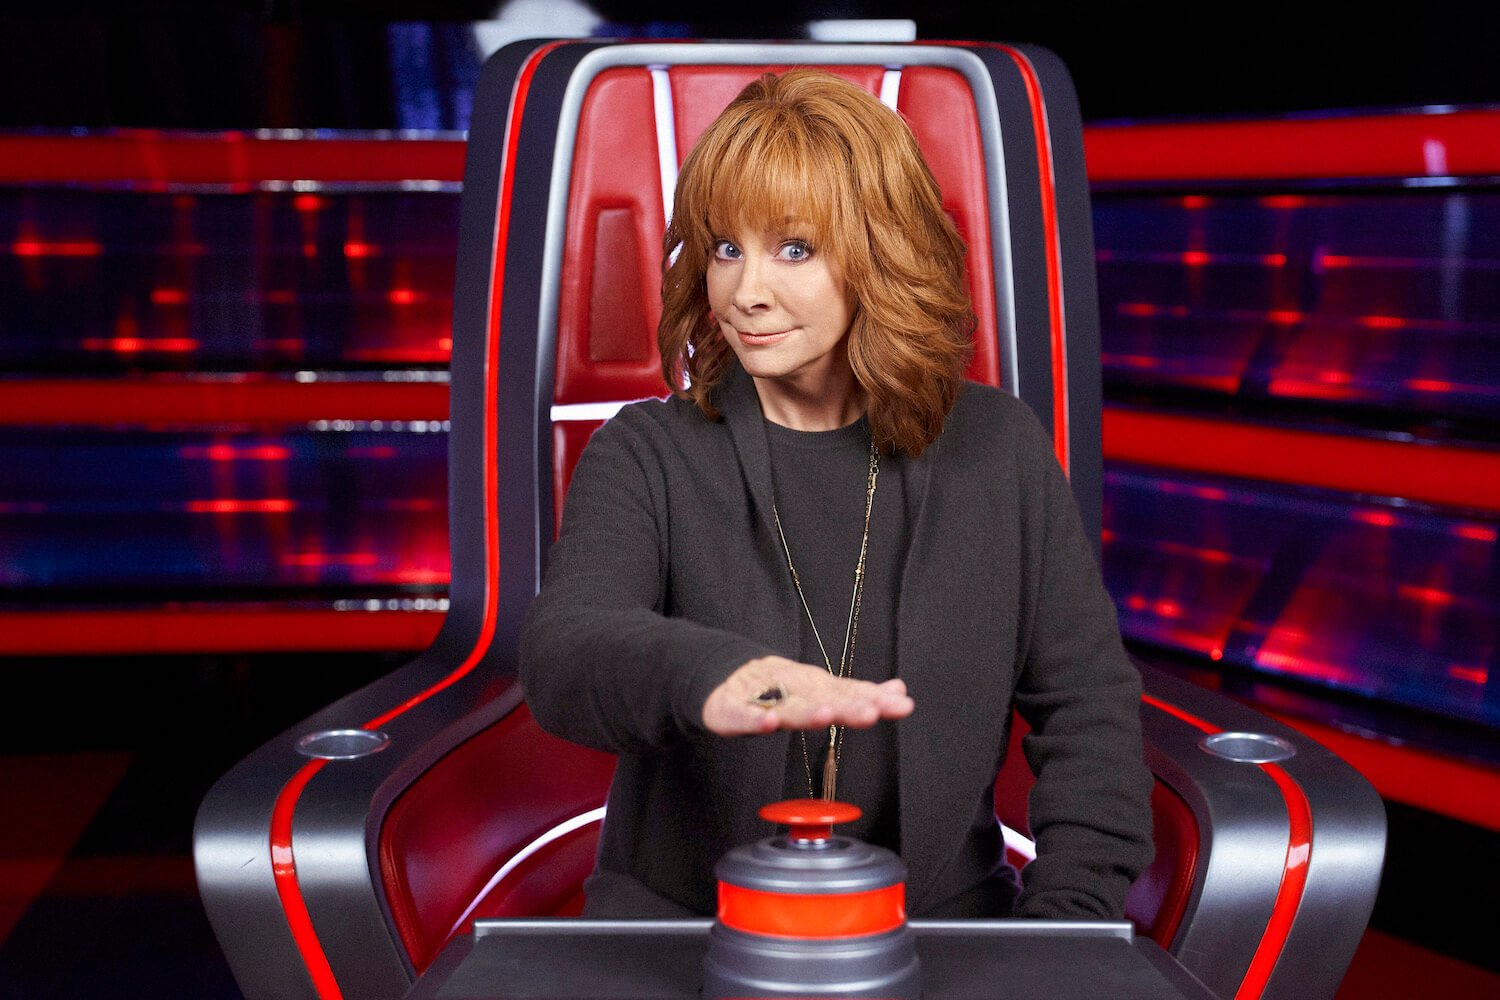 Reba McEntire in 'The Voice' looking mischievous as she holds her hand over the red button